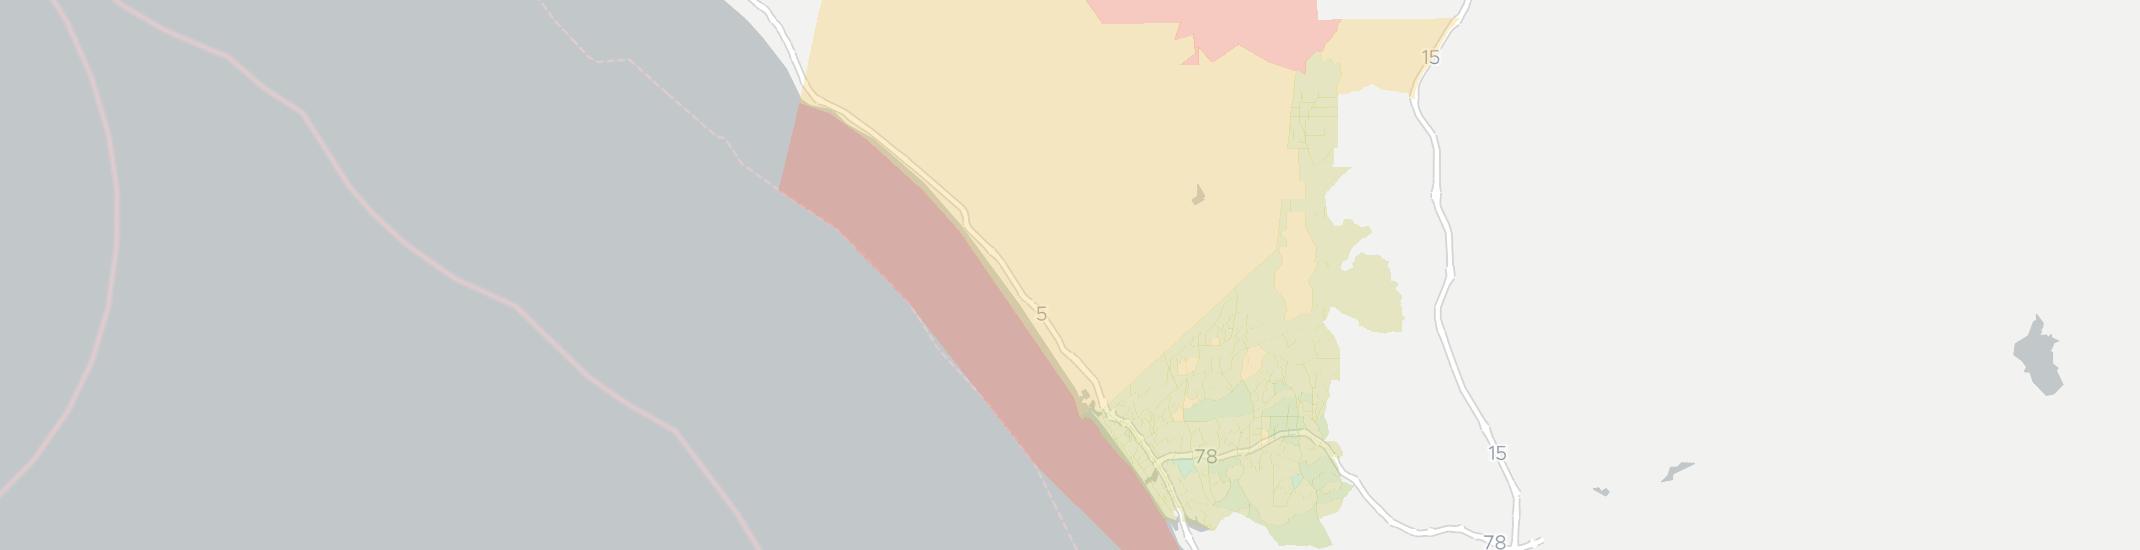 Oceanside Internet Competition Map. Click for interactive map.